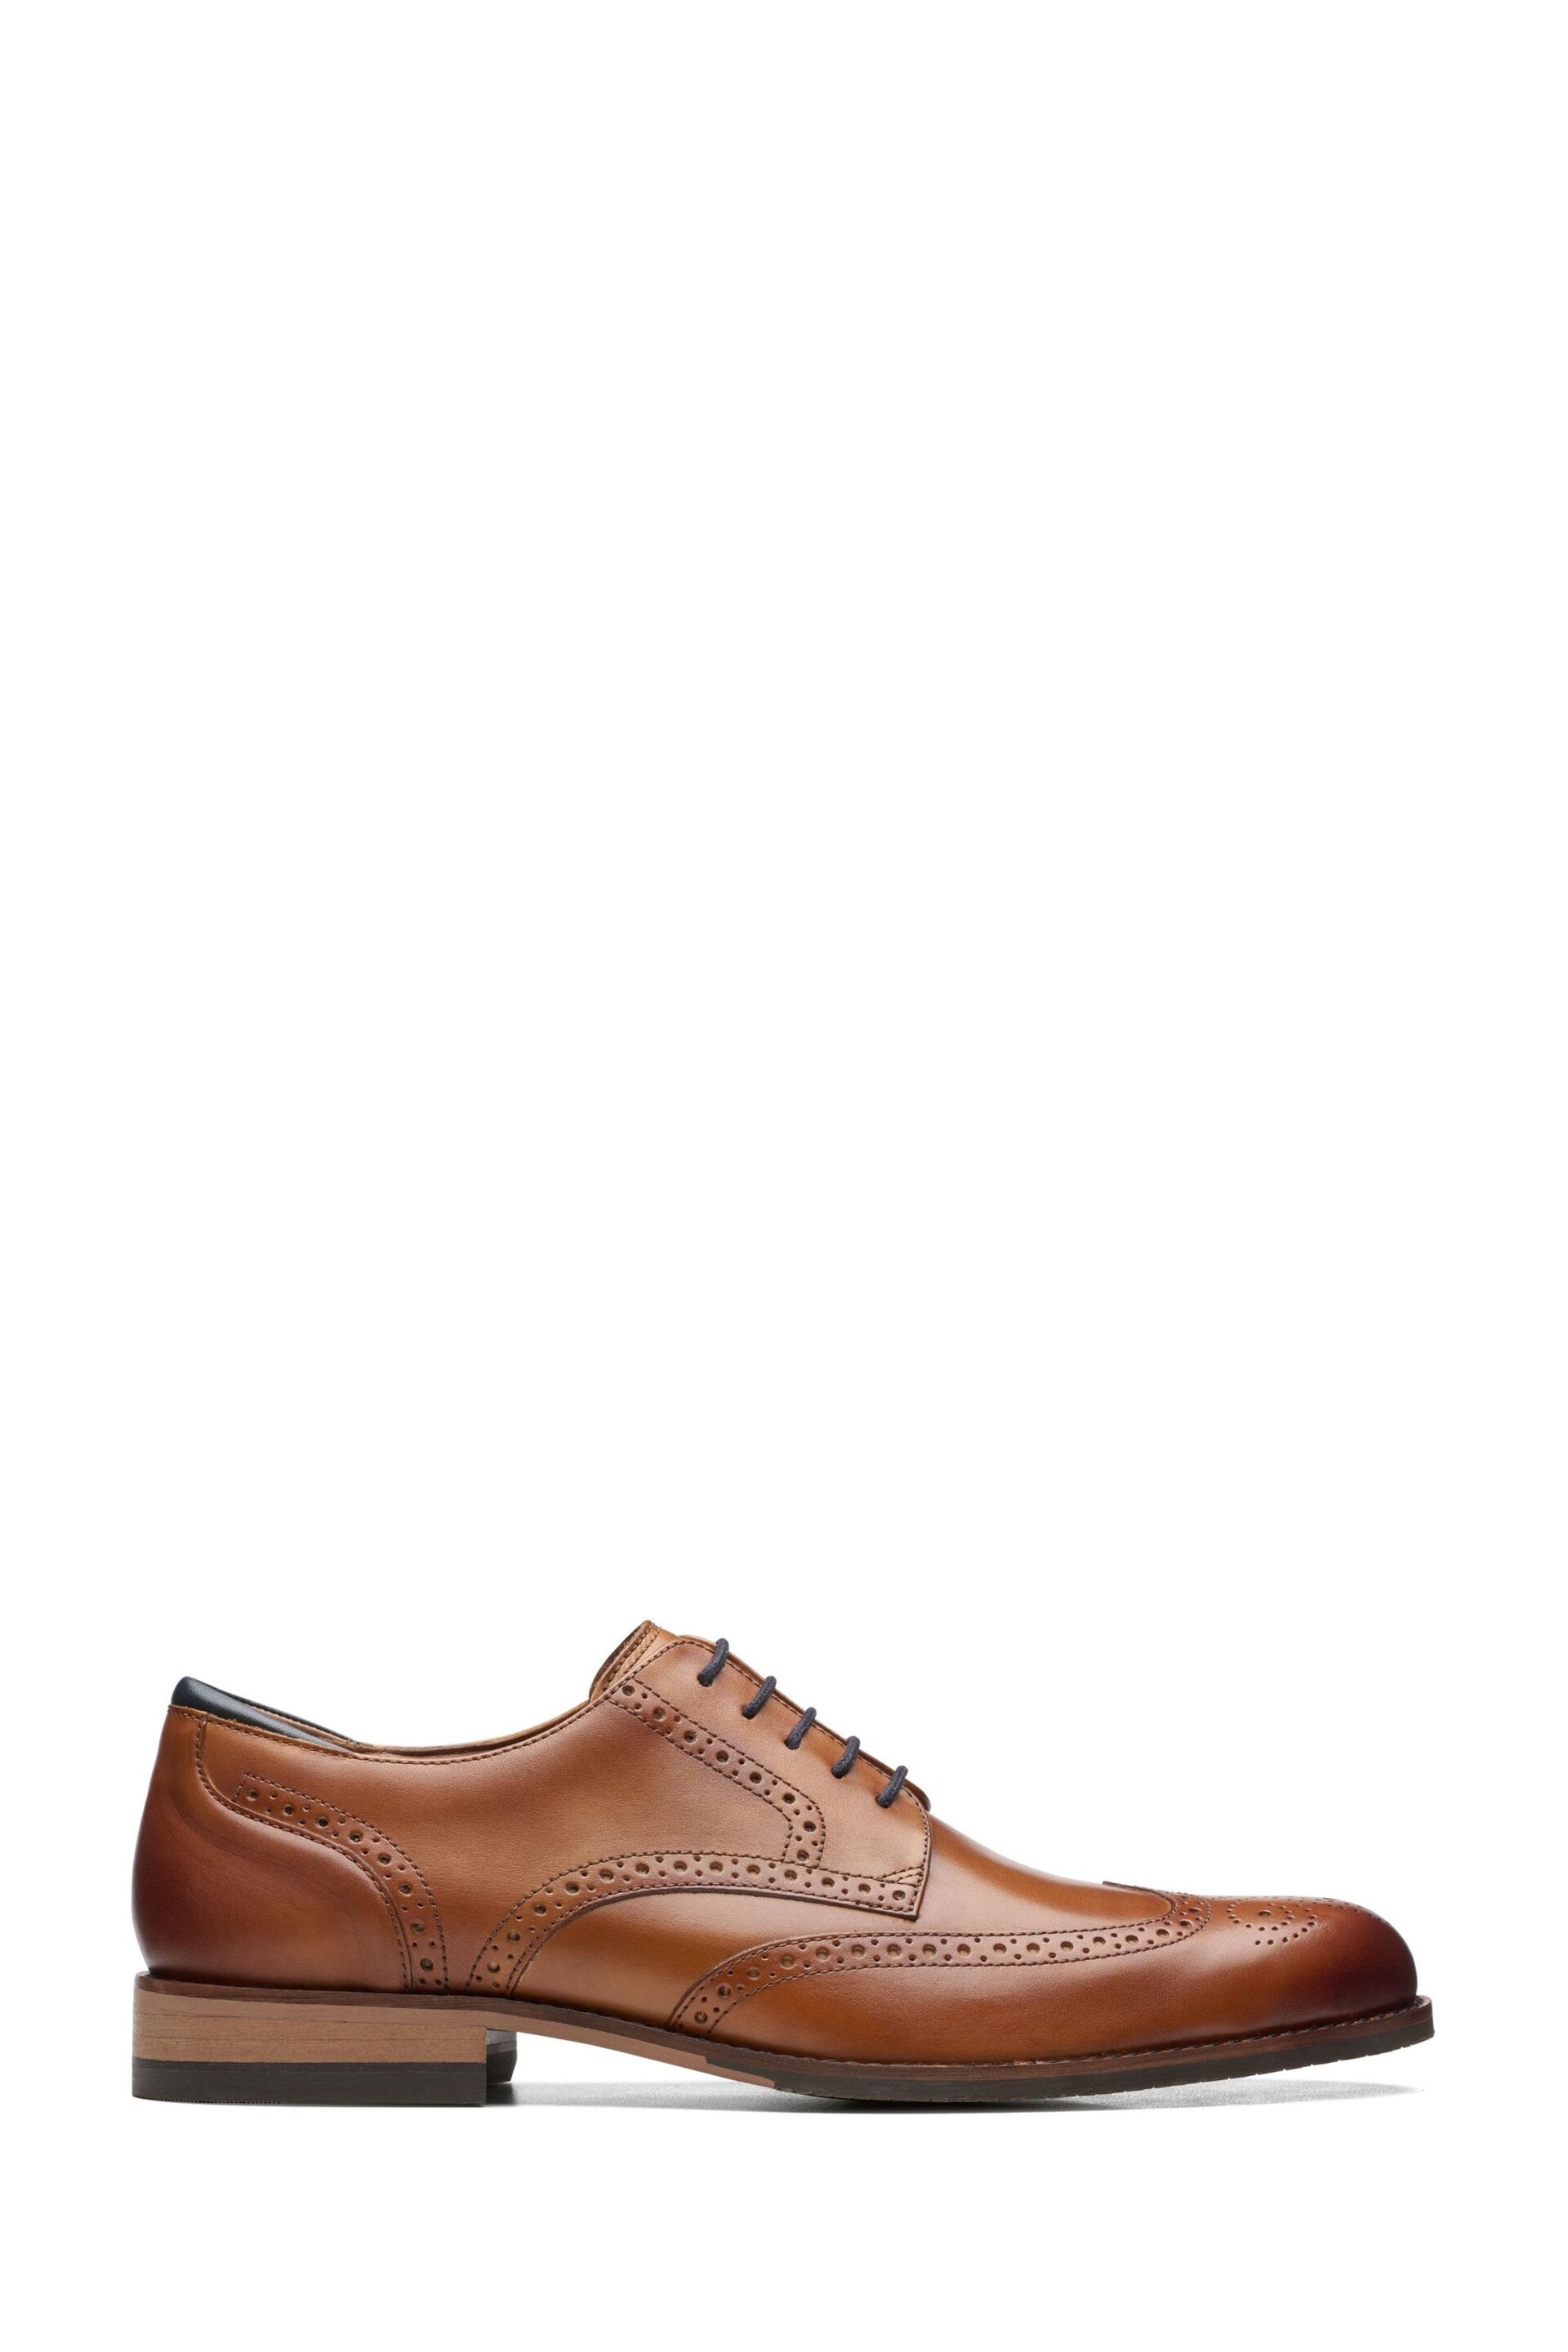 Clarks Natural Leather Craftarlo Limit Shoes - Image 1 of 7